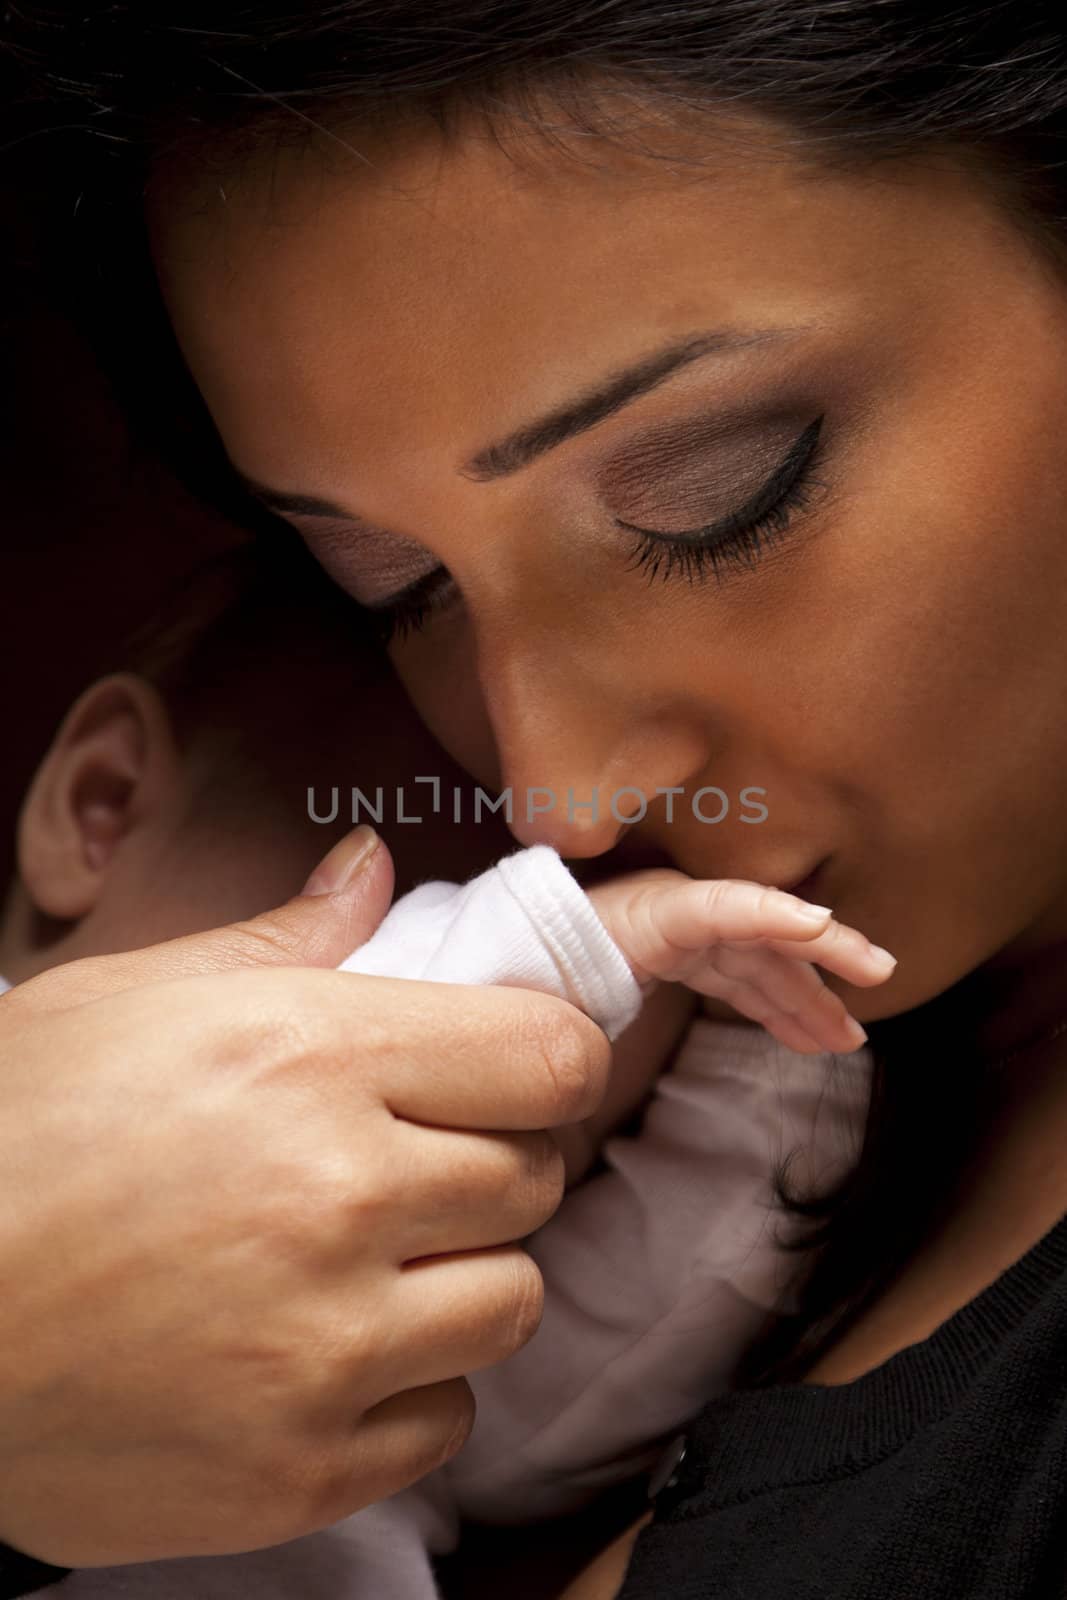 Ethnic Woman Kisses Her Newborn Baby Hand by Feverpitched